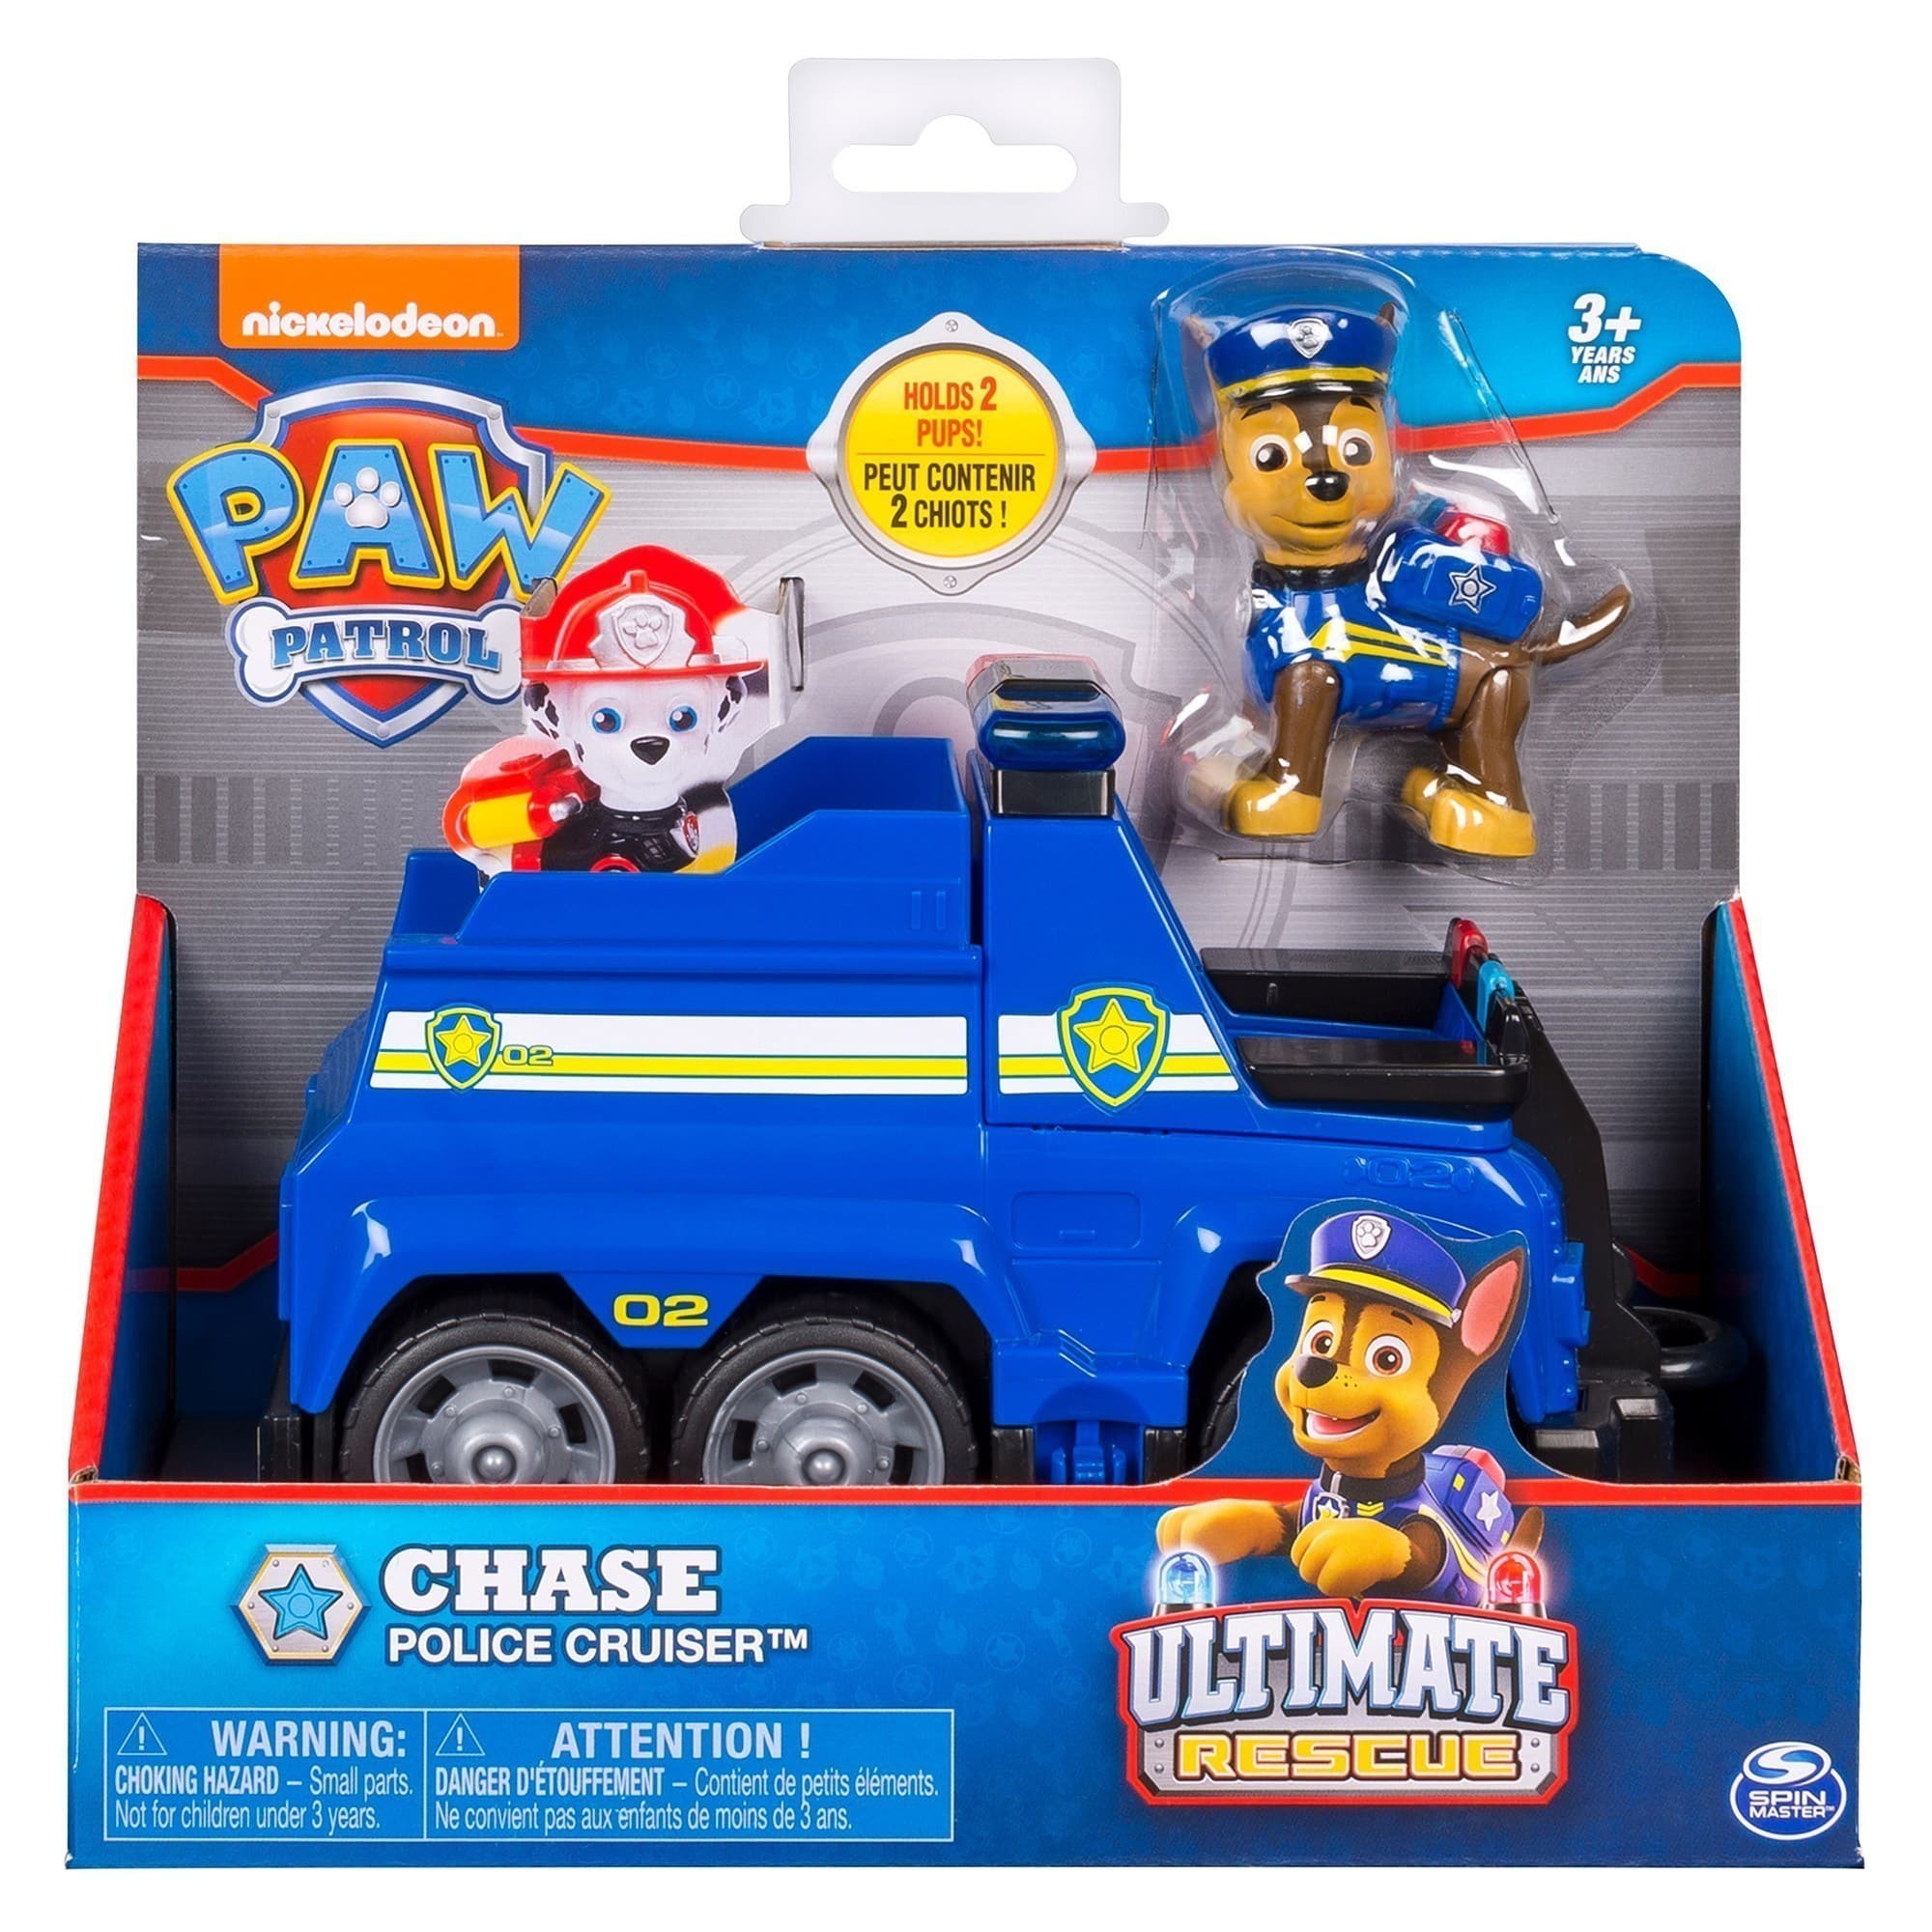 Nickelodeon Paw Patrol Ultimate Rescue Chase Police Cruiser